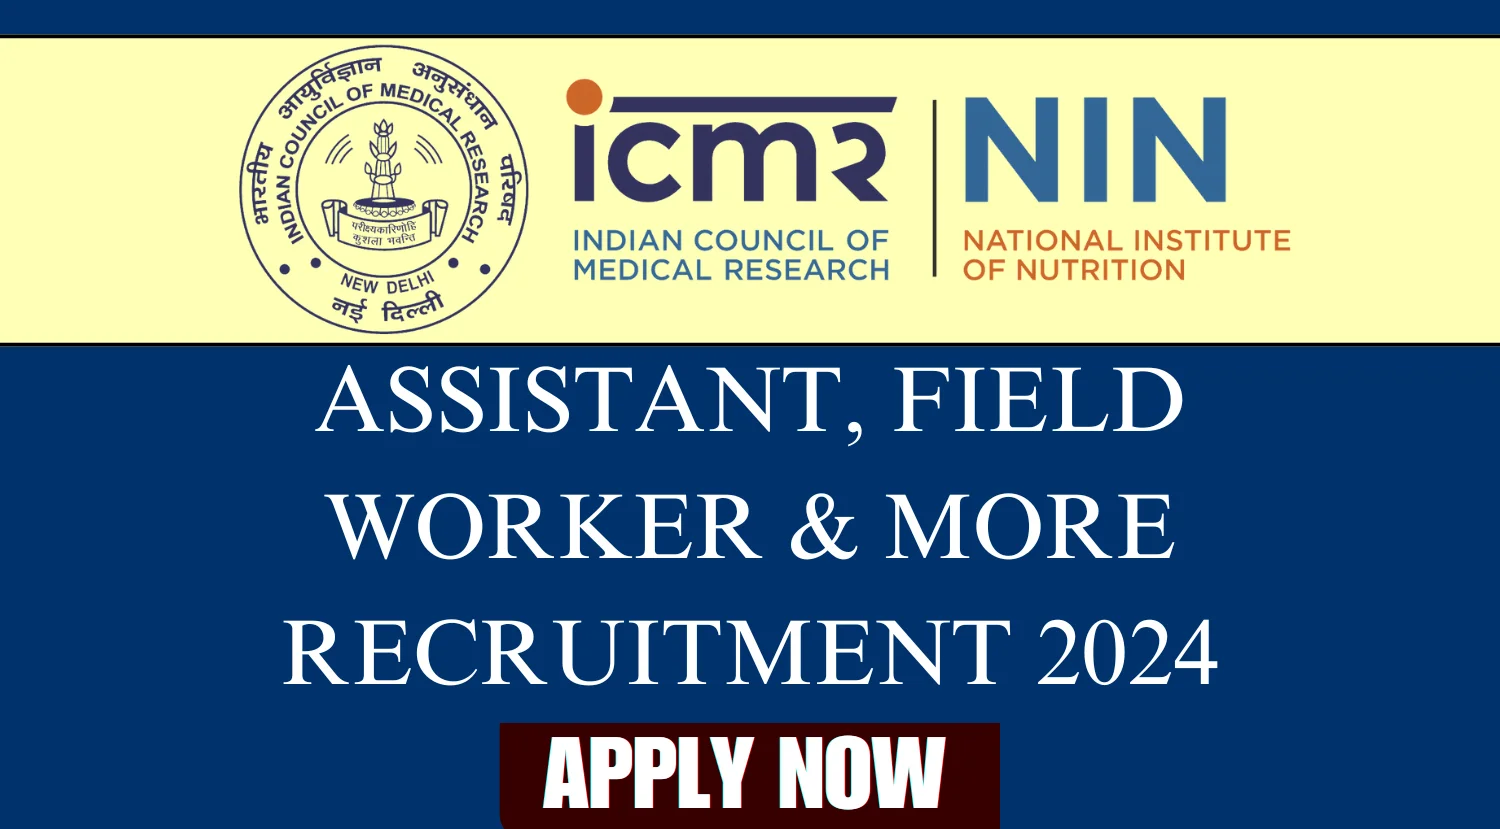 ICMR NIN Recruitment 2024 for Assistant, Field Worker & More